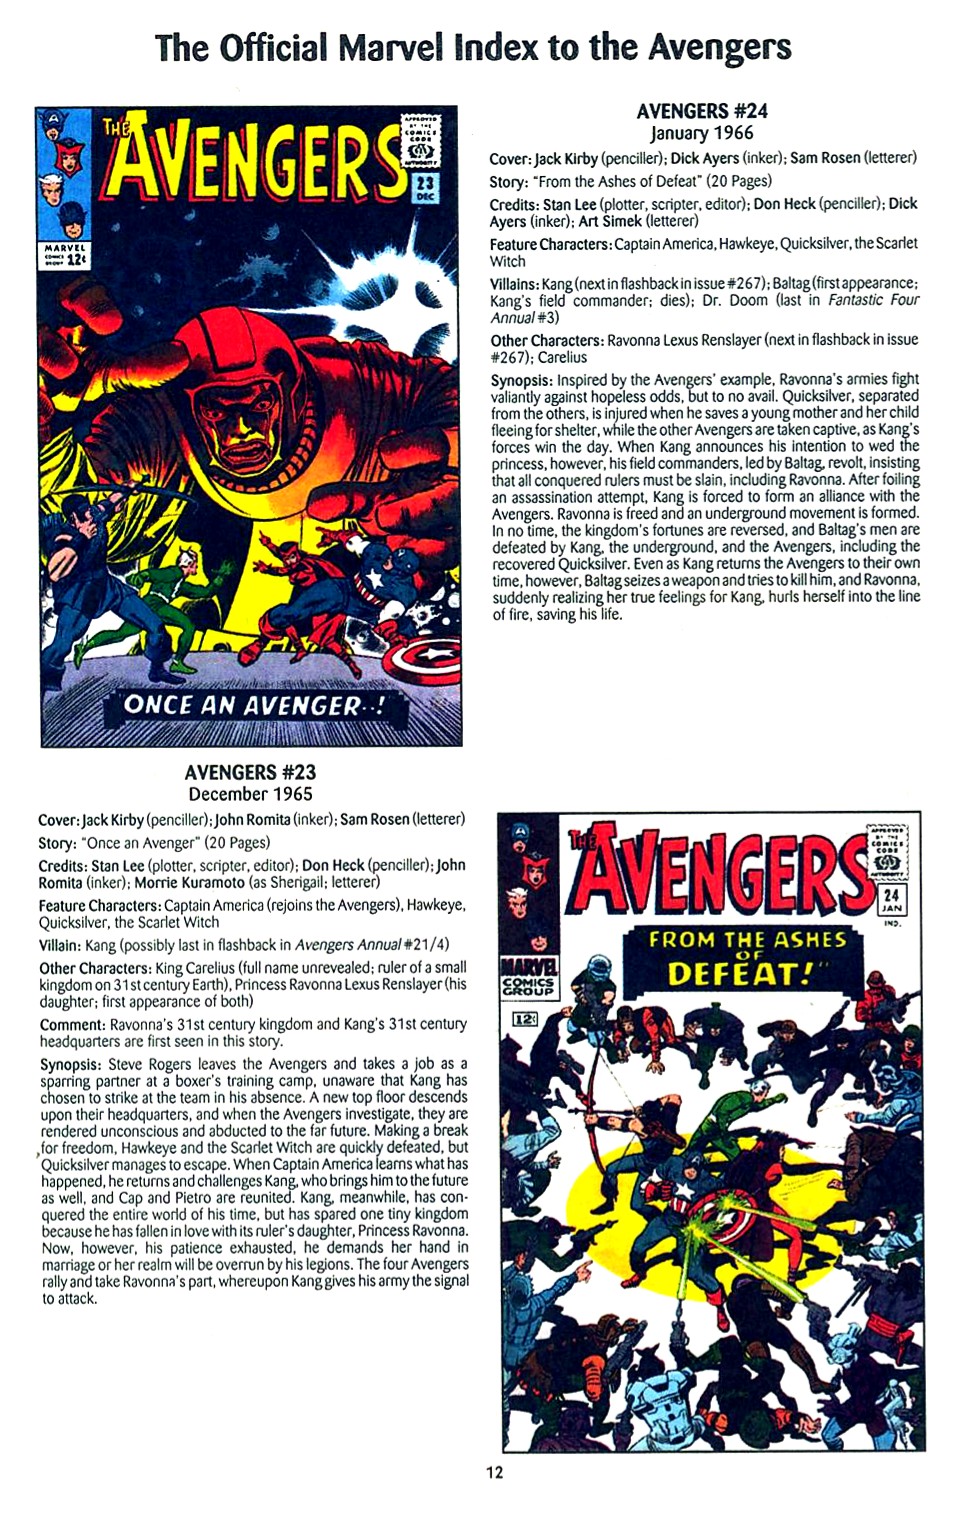 Read online The Official Marvel Index to the Avengers comic -  Issue #1 - 14